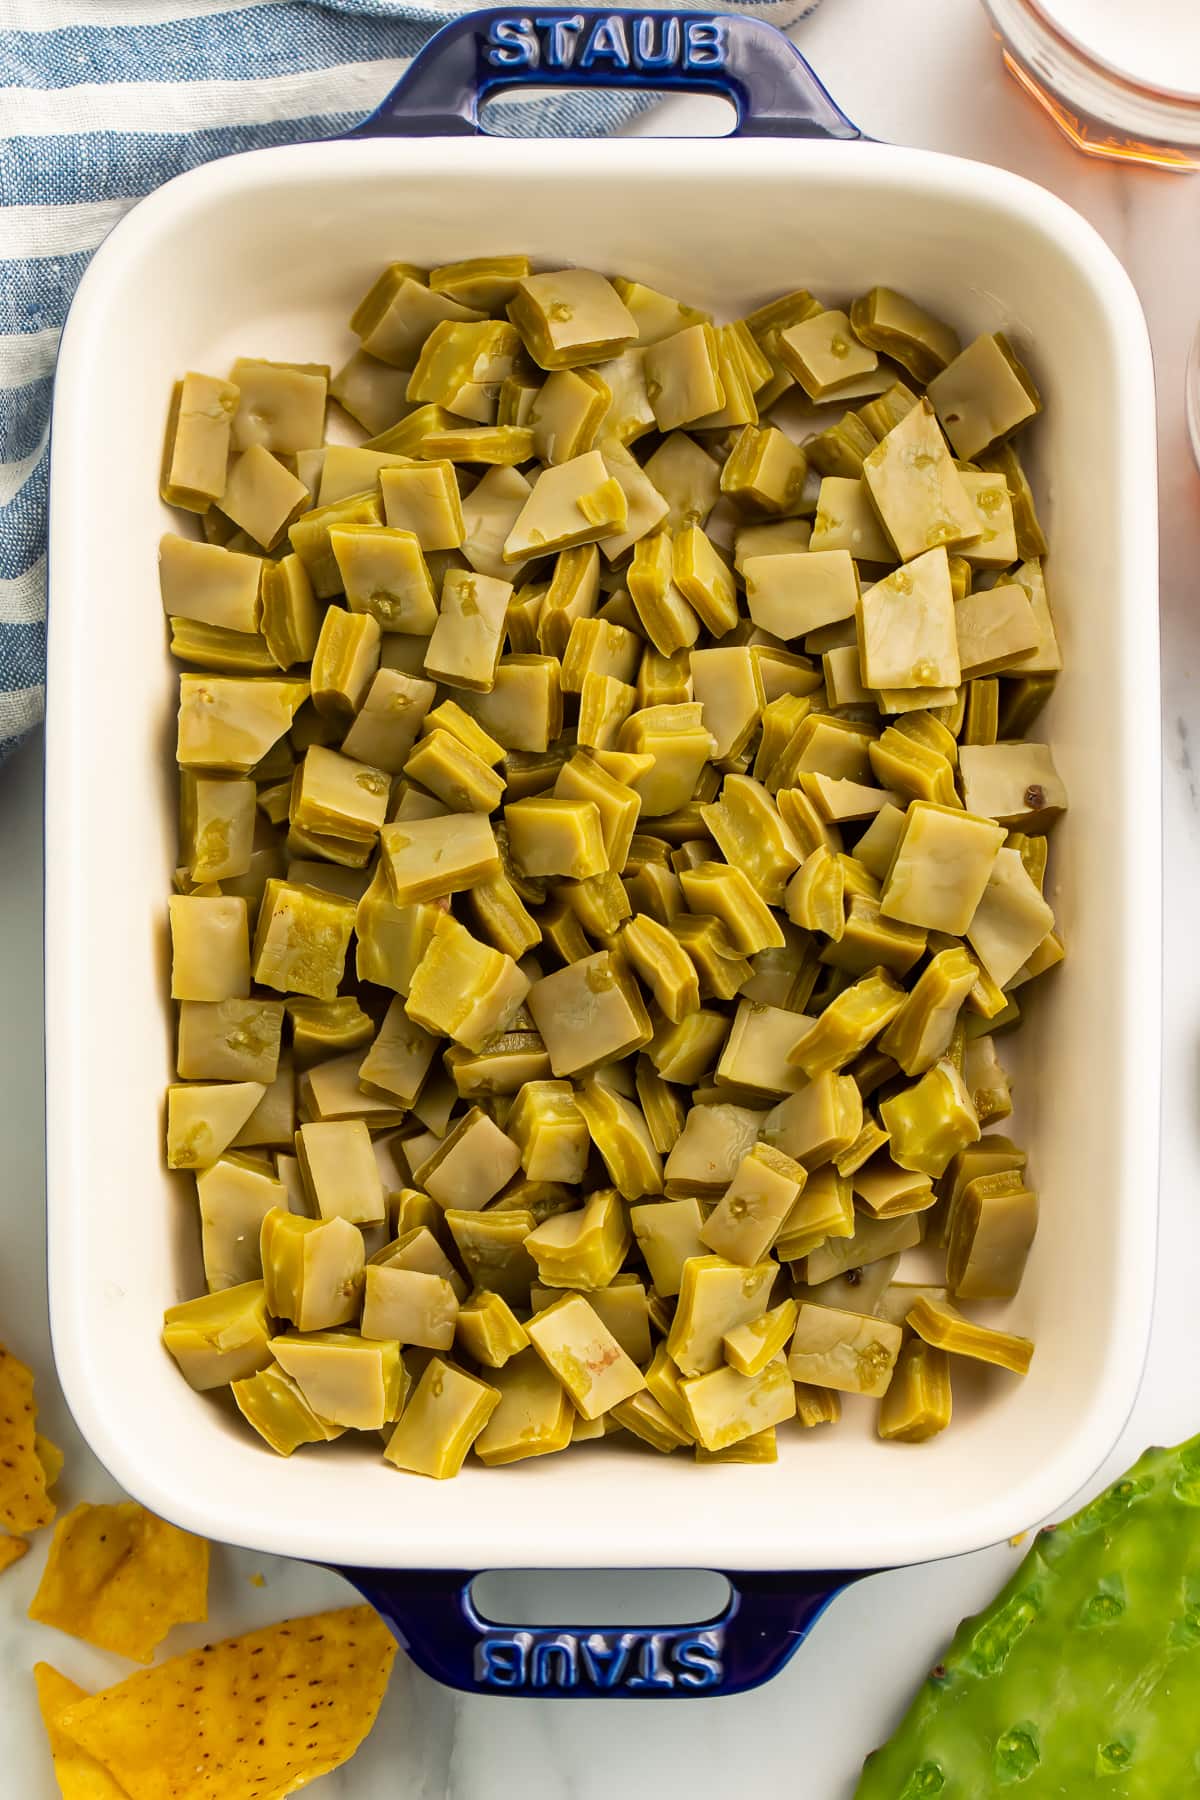 Top-down photo of a casserole dish filled with diced nopales.